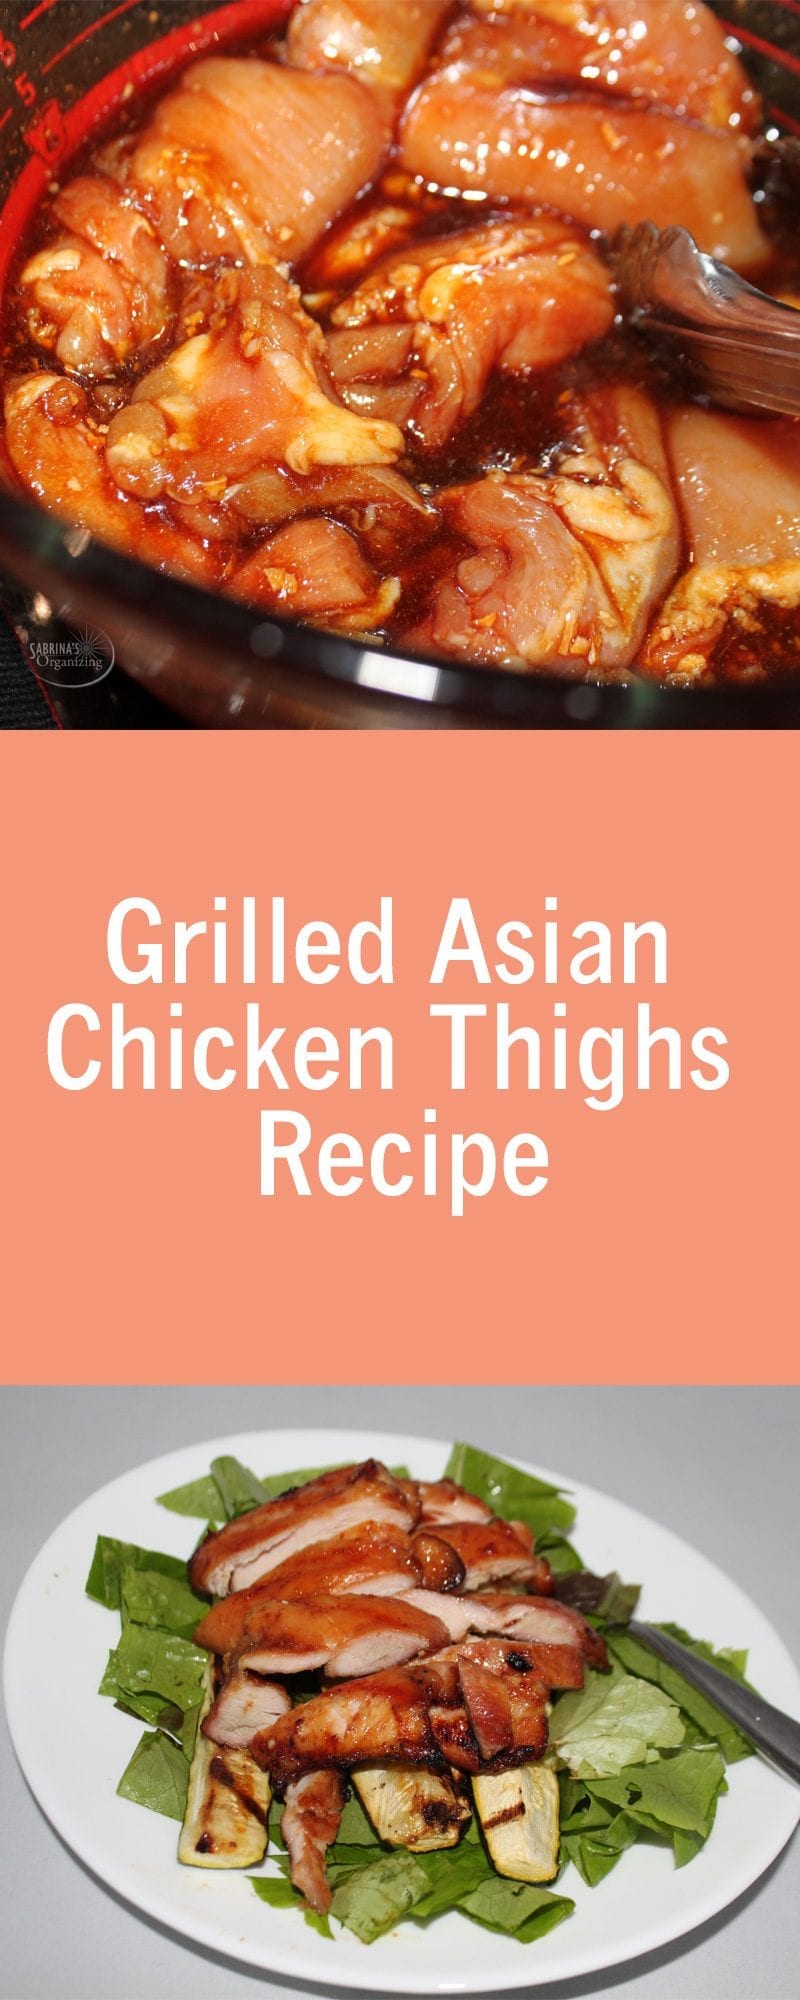 Grilled Asian Chicken Thighs Recipe